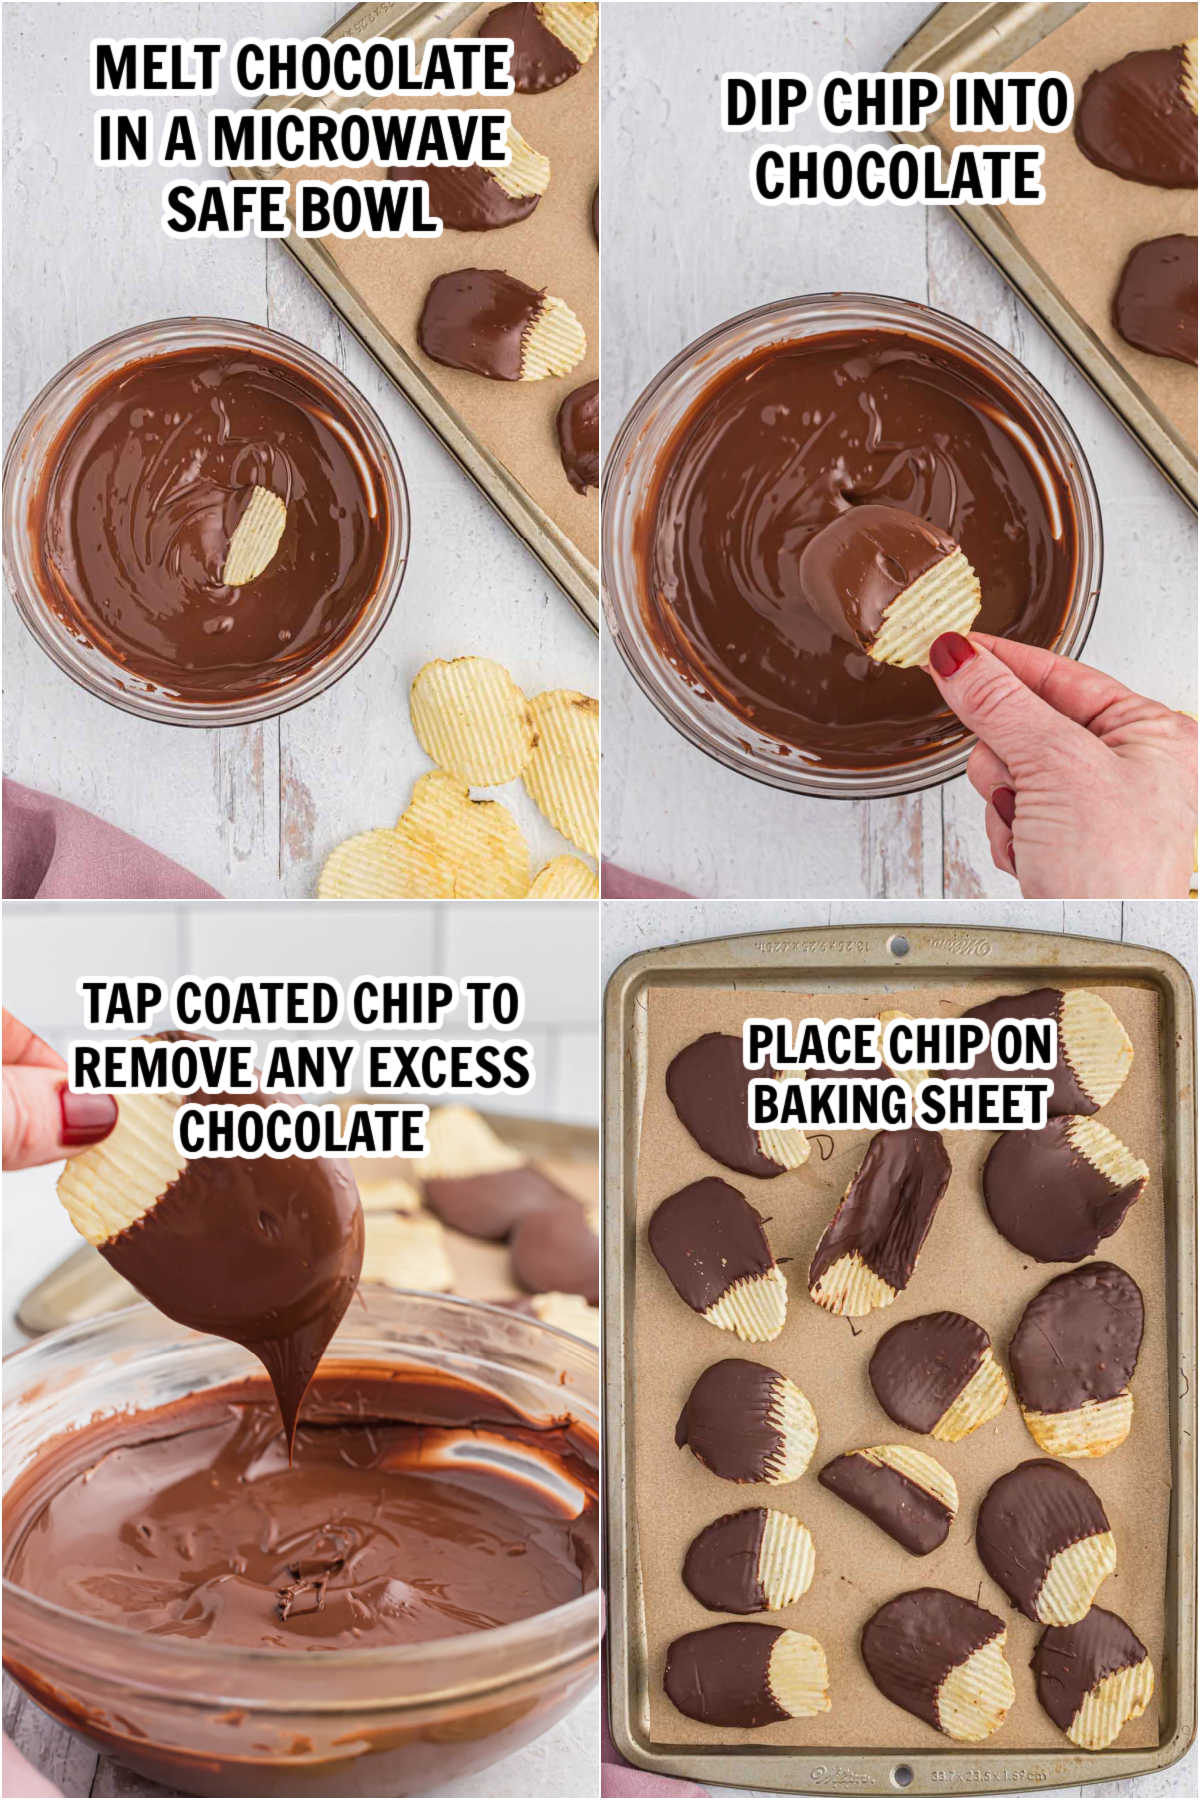 Melting Chocolate Chips in Microwave - How to Melt Chocolate